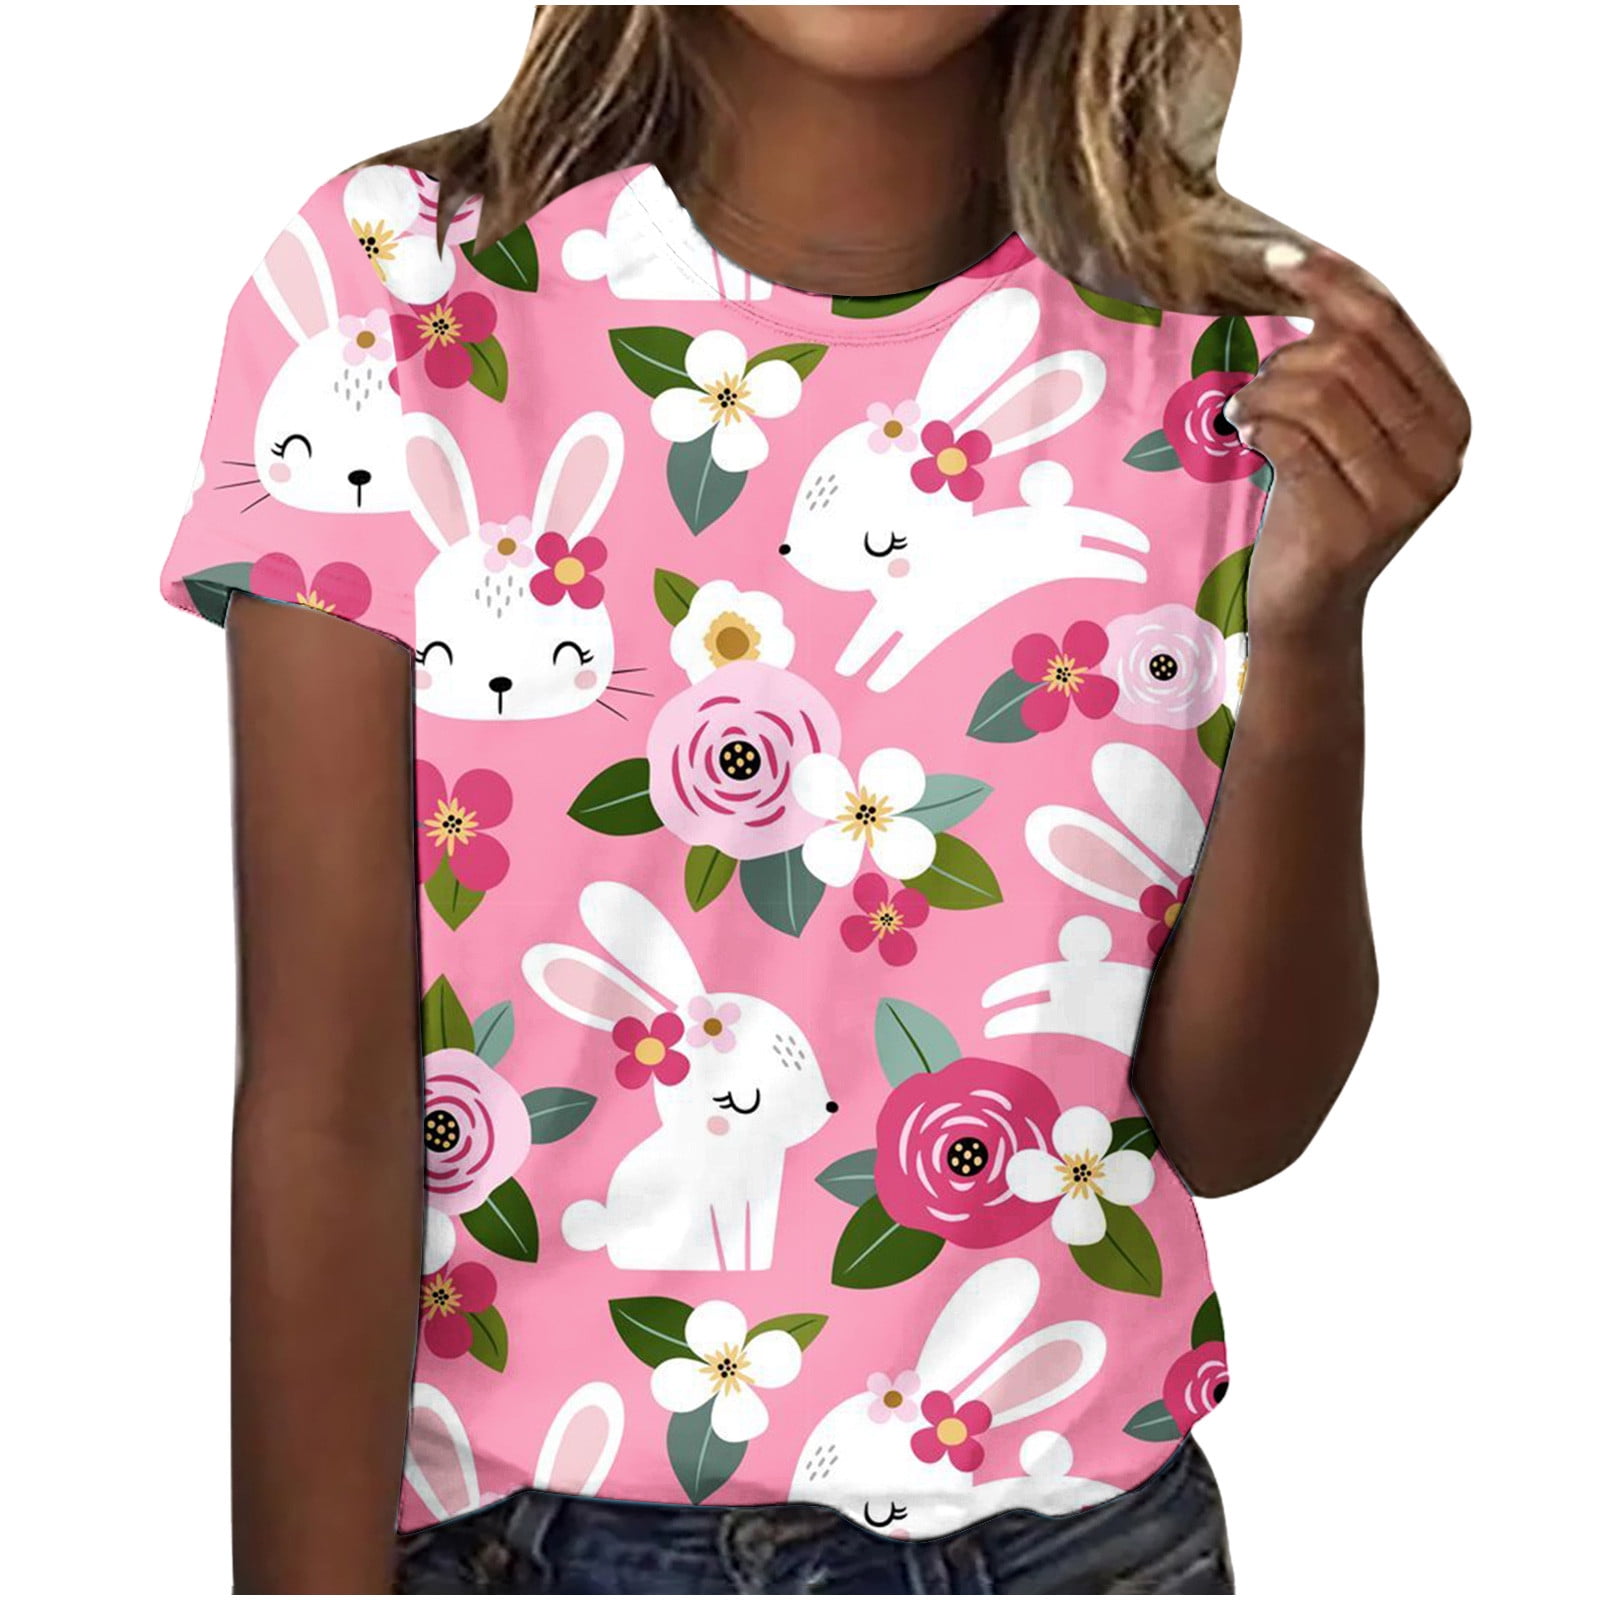 ZQGJB Womens T-Shirts Funny Rabbit Printed Short Sleeve Summer Tops  Clearance Cute Graphic Holiday Gifts Tees Trendy Lightweight Pullover  Blouse Pink S 